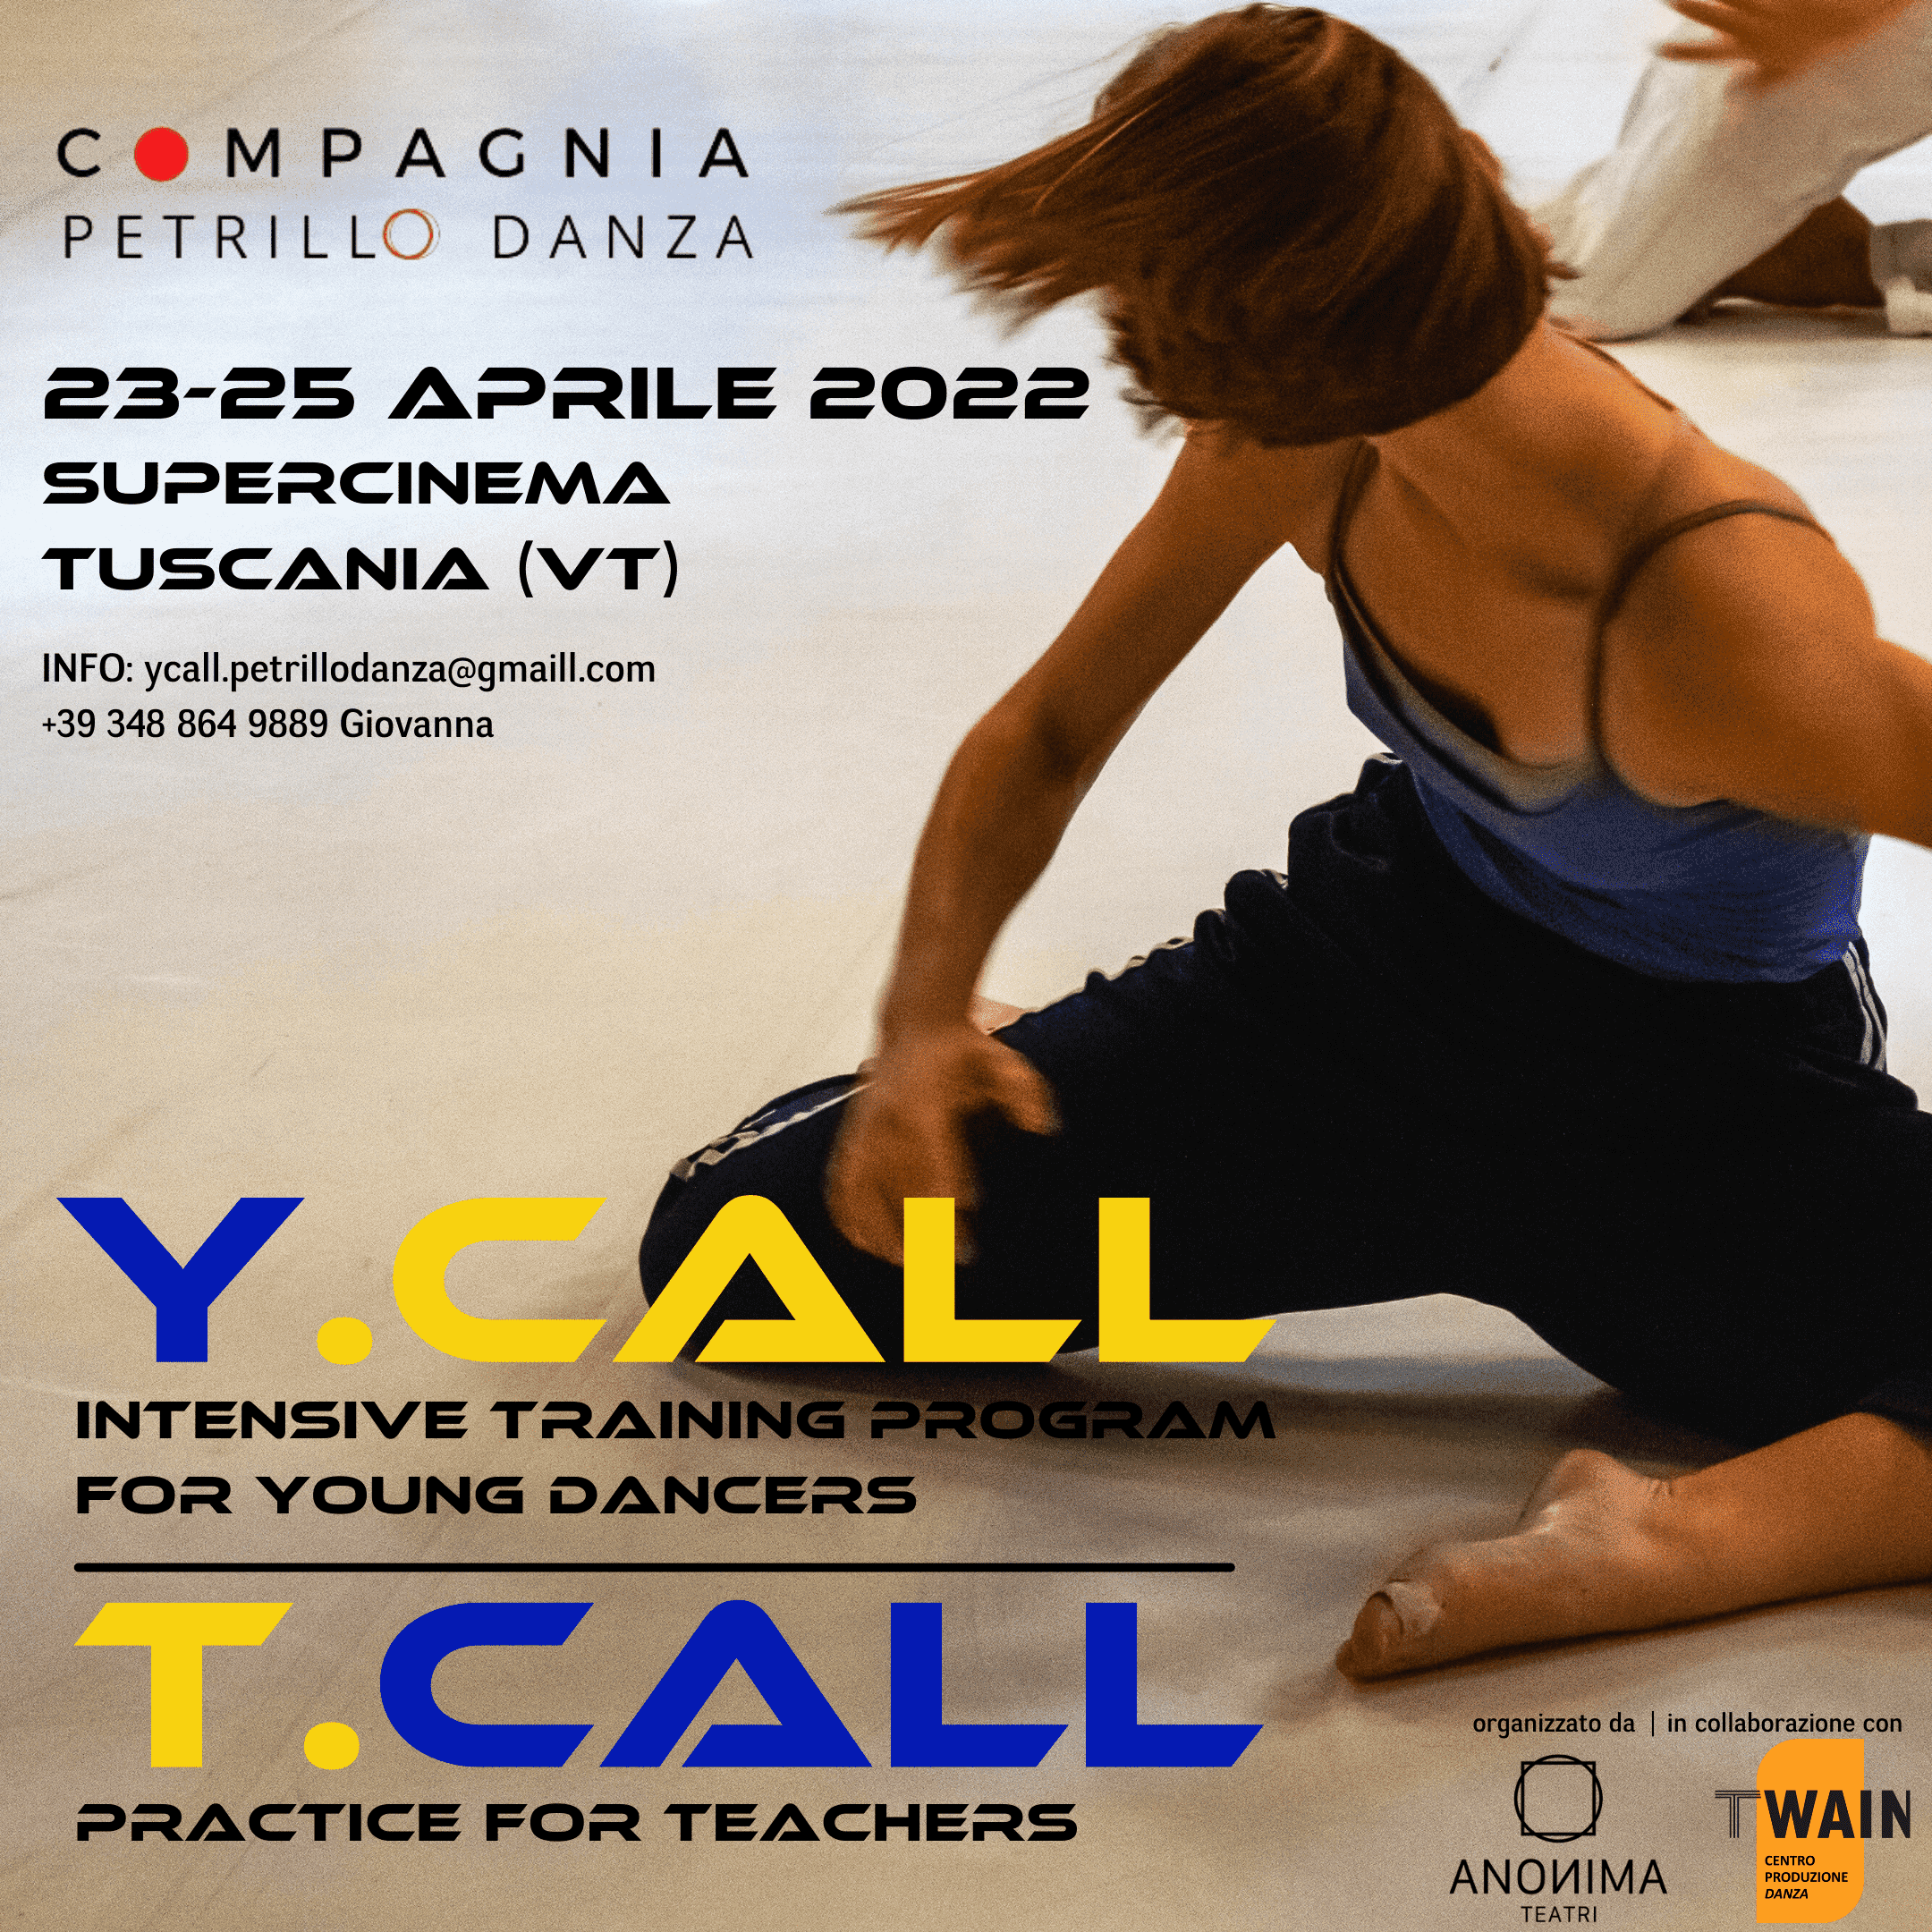 ycall for young dancers + tcall for teachers 2022